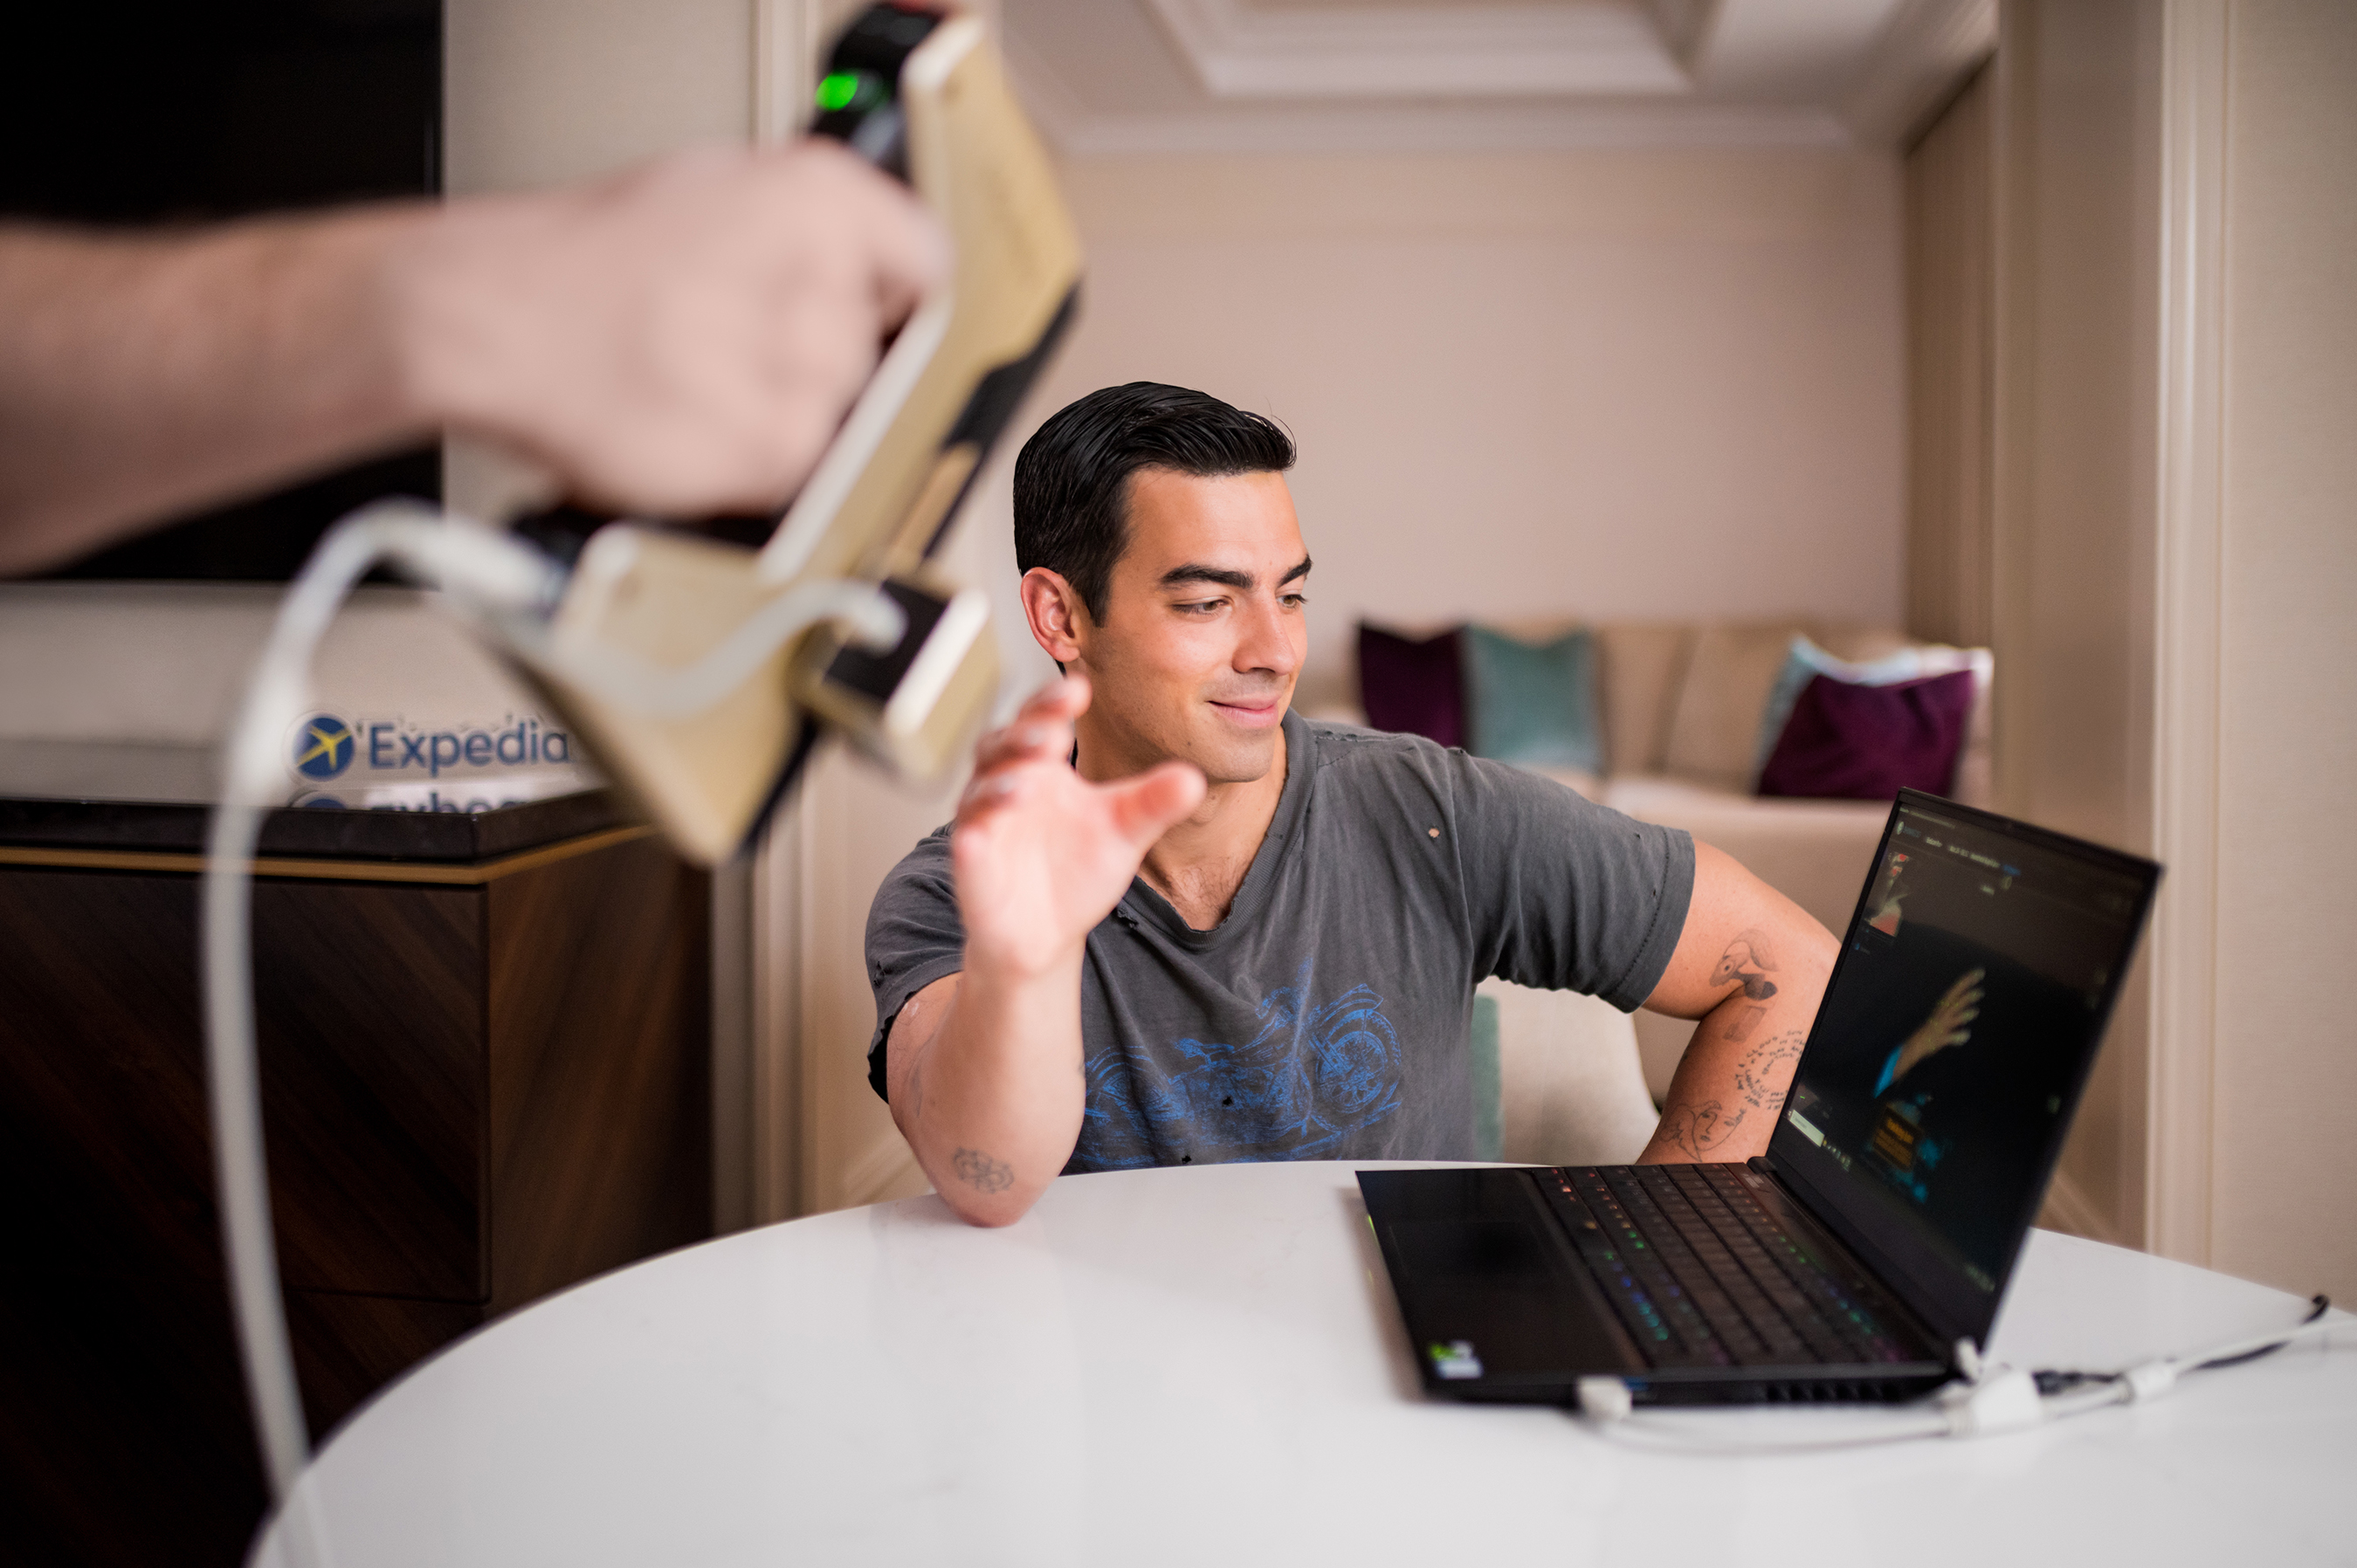 How it’s made - A 3D scan of Joe Jonas’s right hand is captured to ensure an exact replica for the Expedia Helping Hand